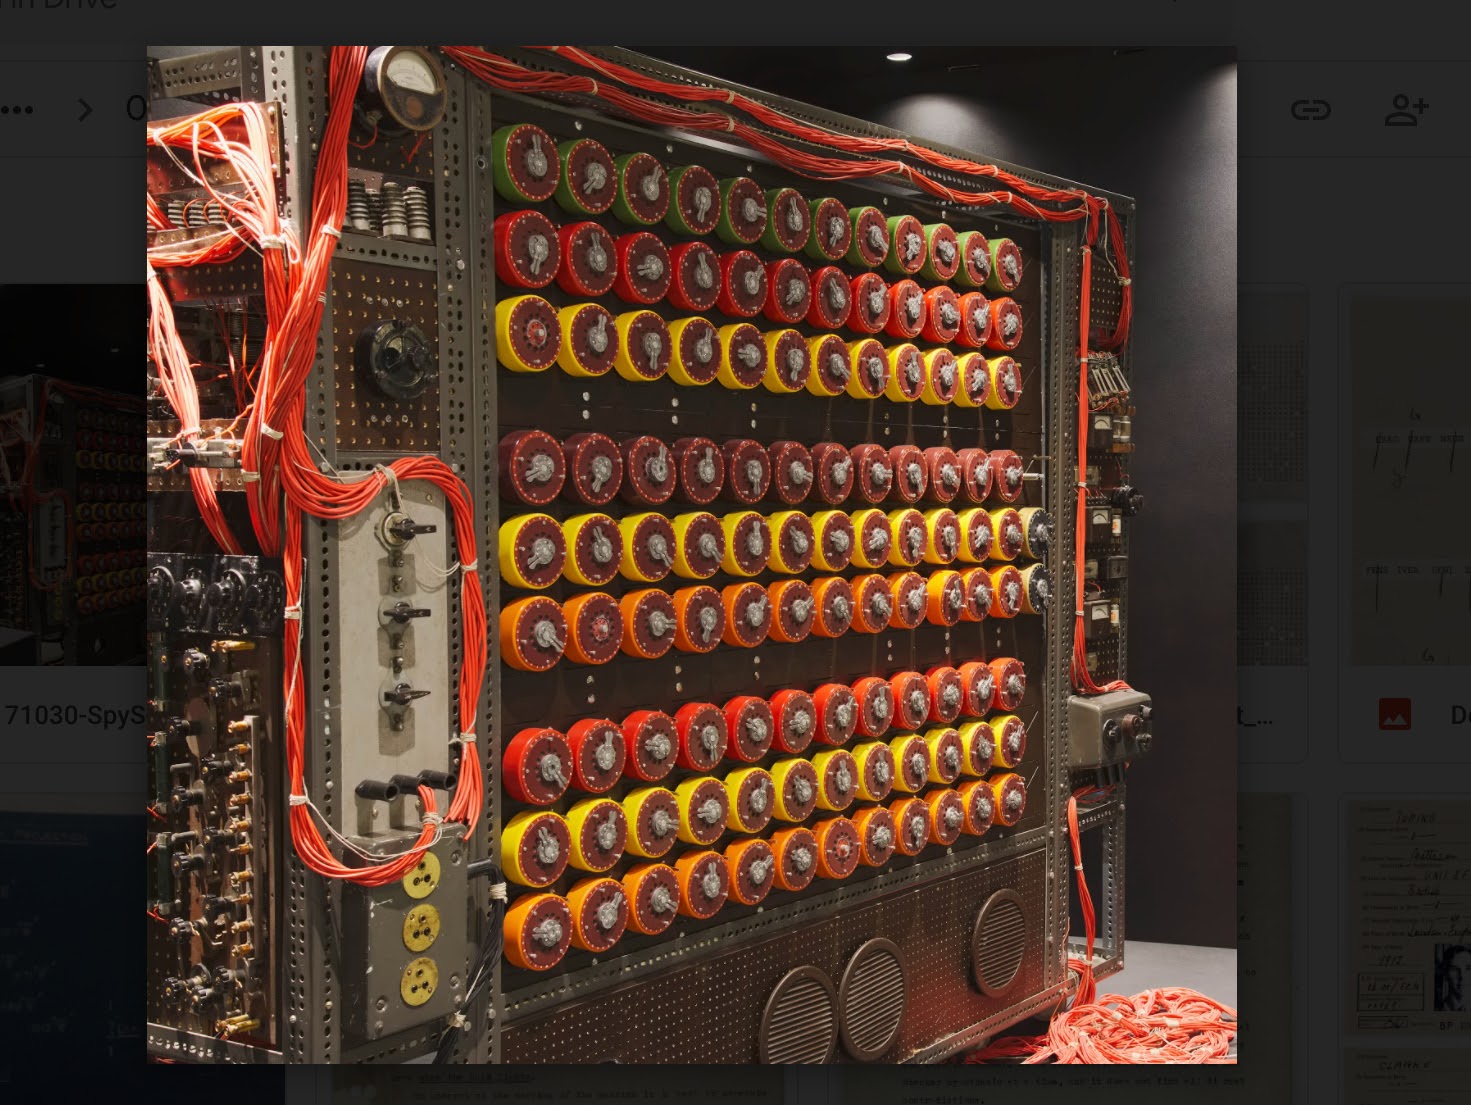 SPYSCAPE's Bombe machine where Bletchley Park Codebreaker Alan Turing Worked